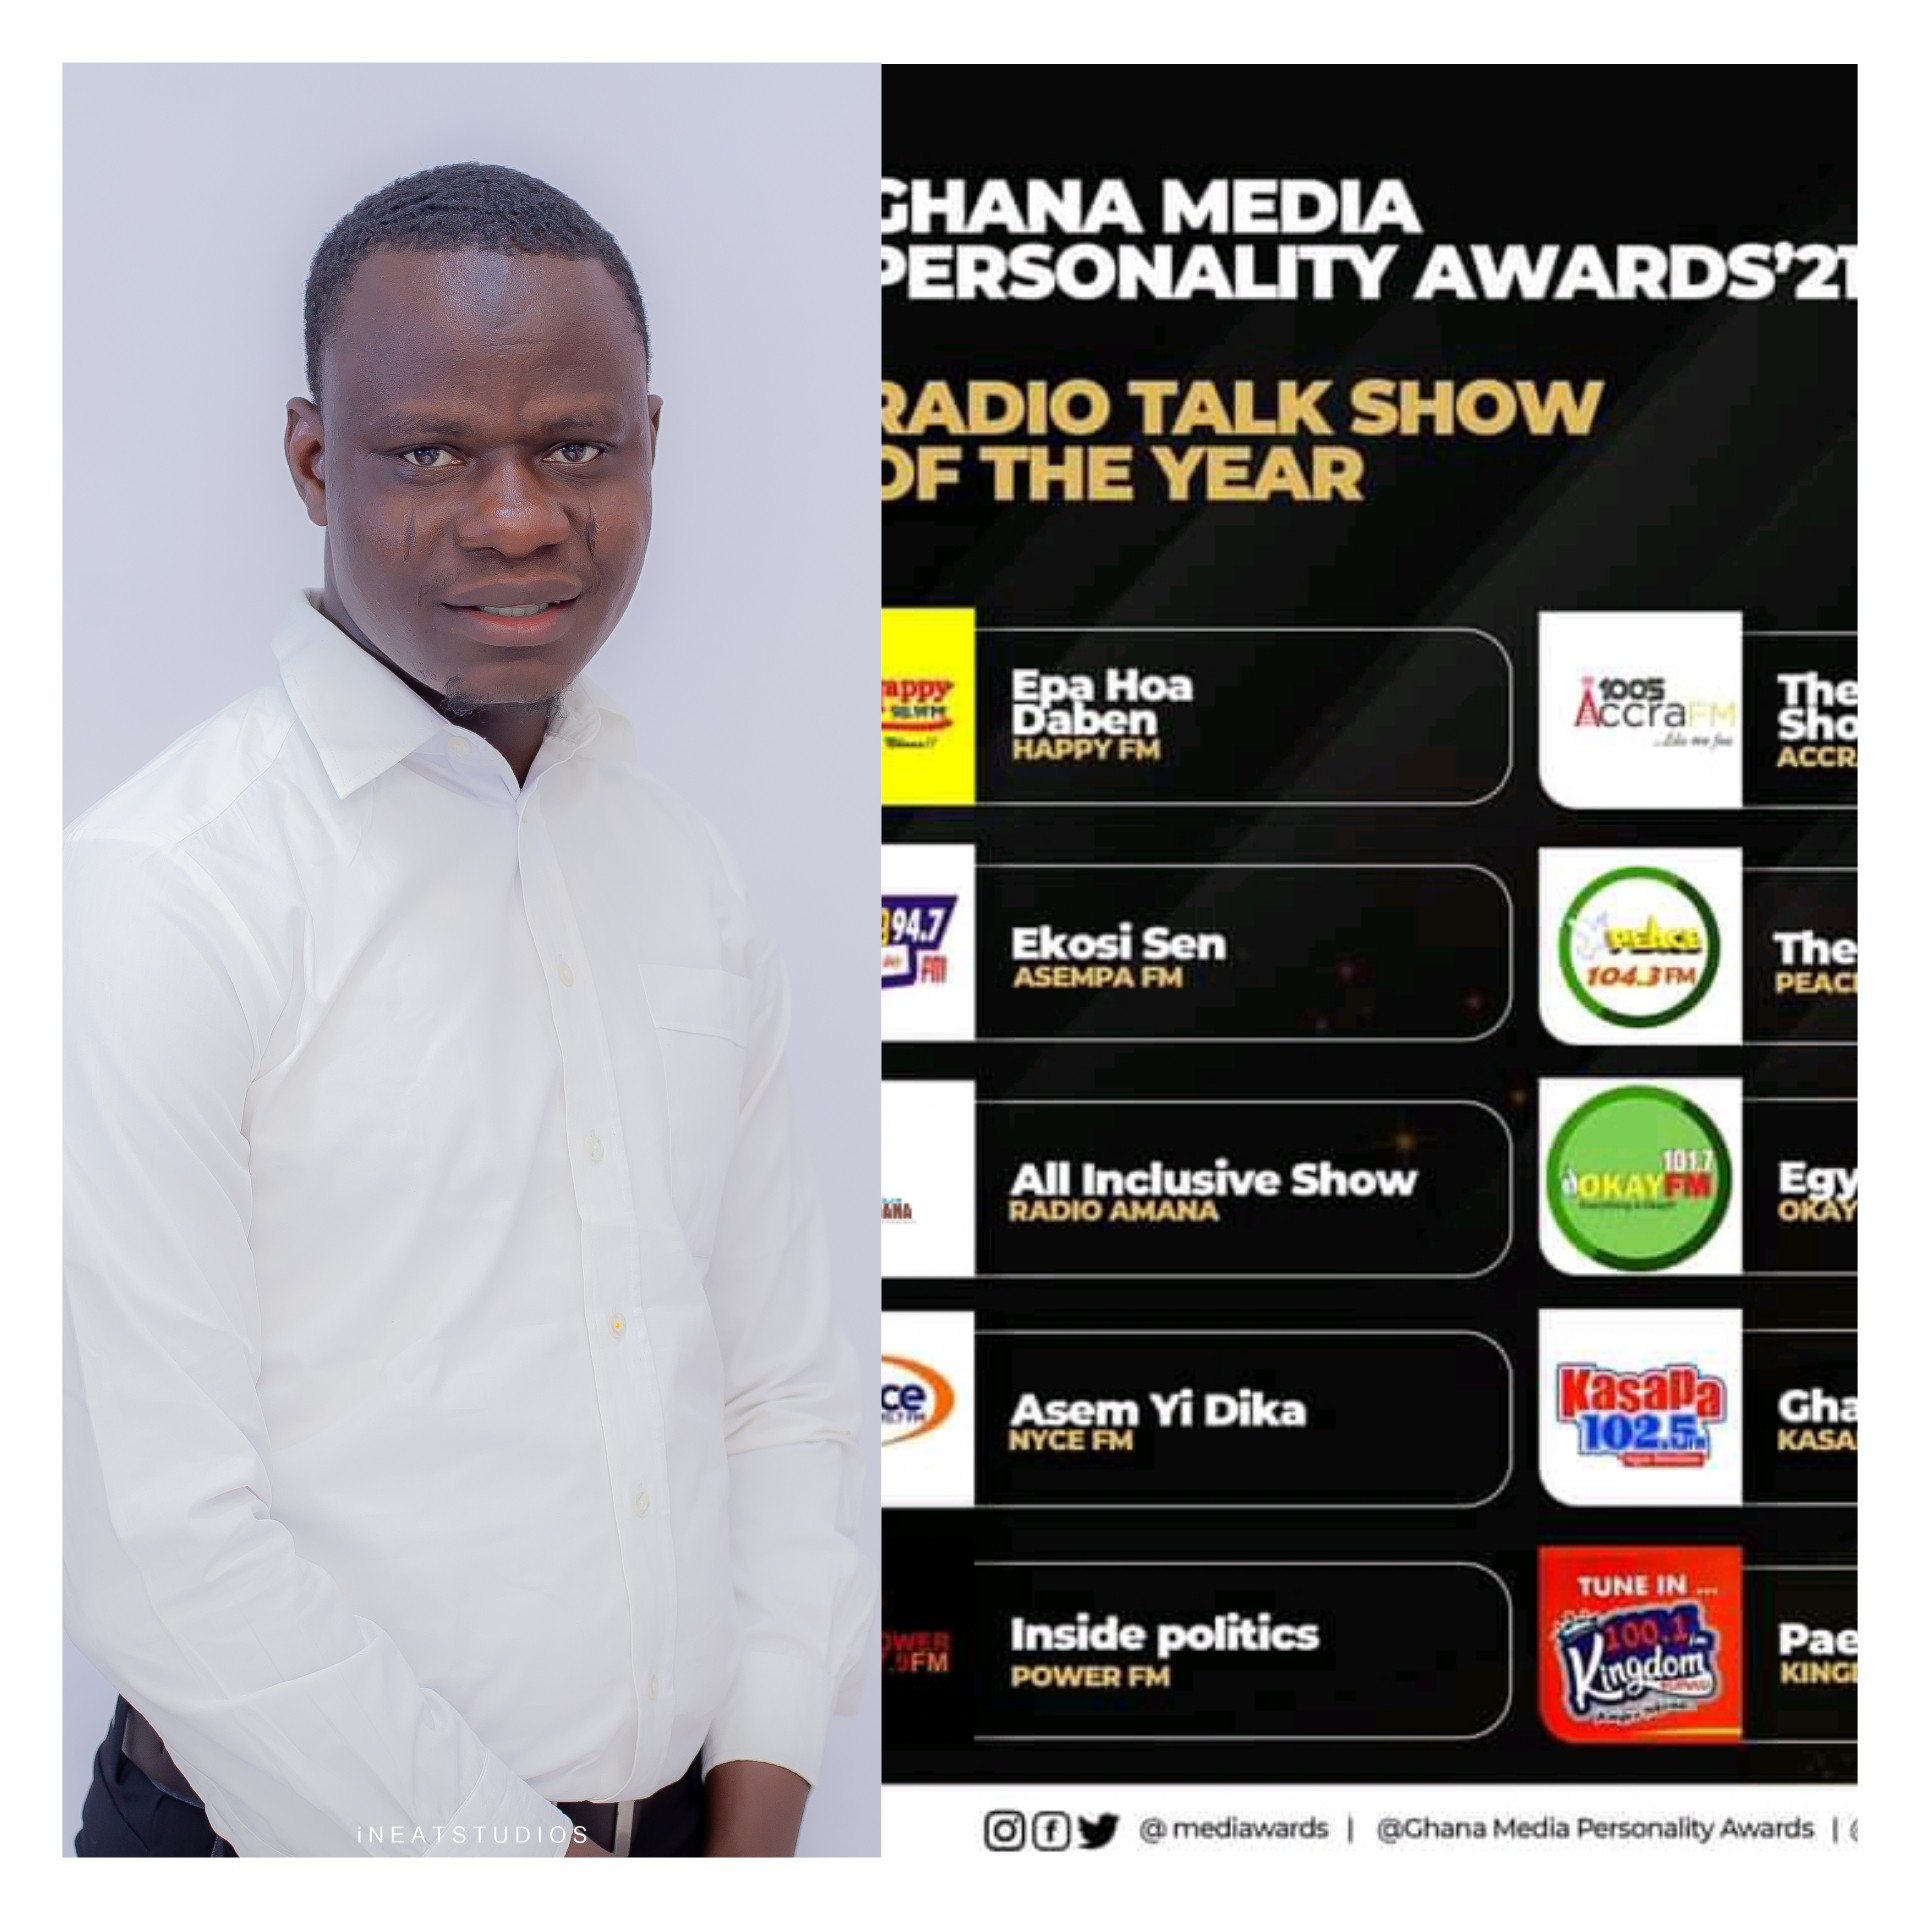 Is Hassan Dablee Becomes 1st Northerner To Be Nominated For ‘Ghana Media Personality Awards’